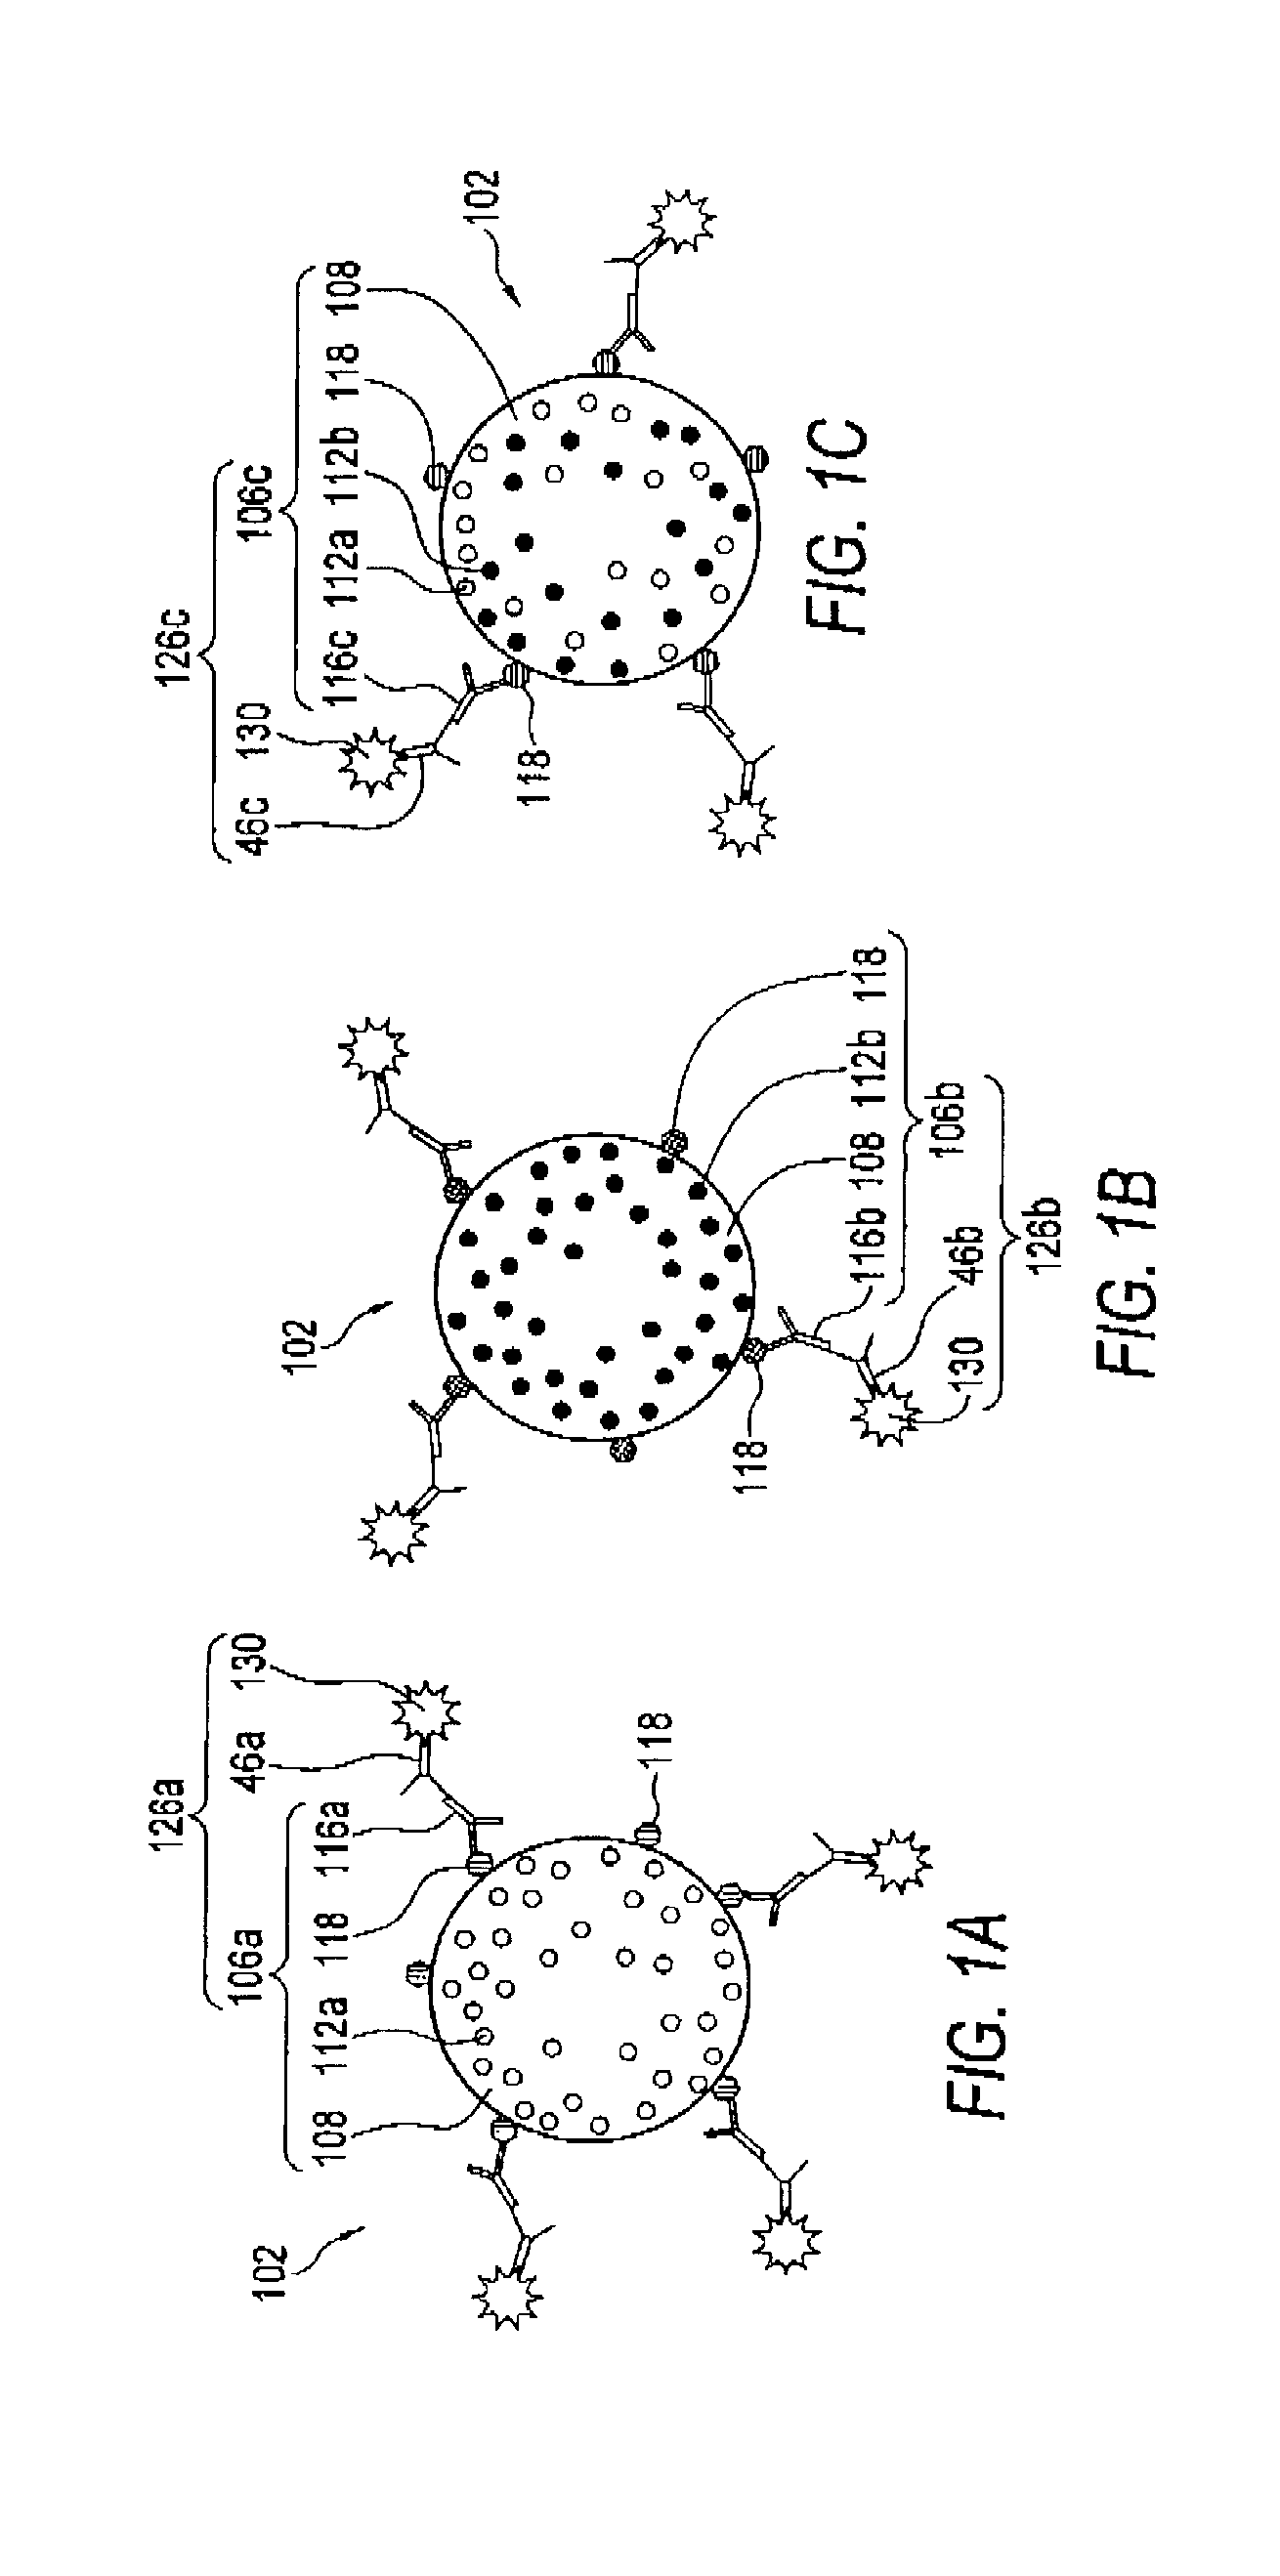 Microfluid system and method to test for target molecules in a biological sample